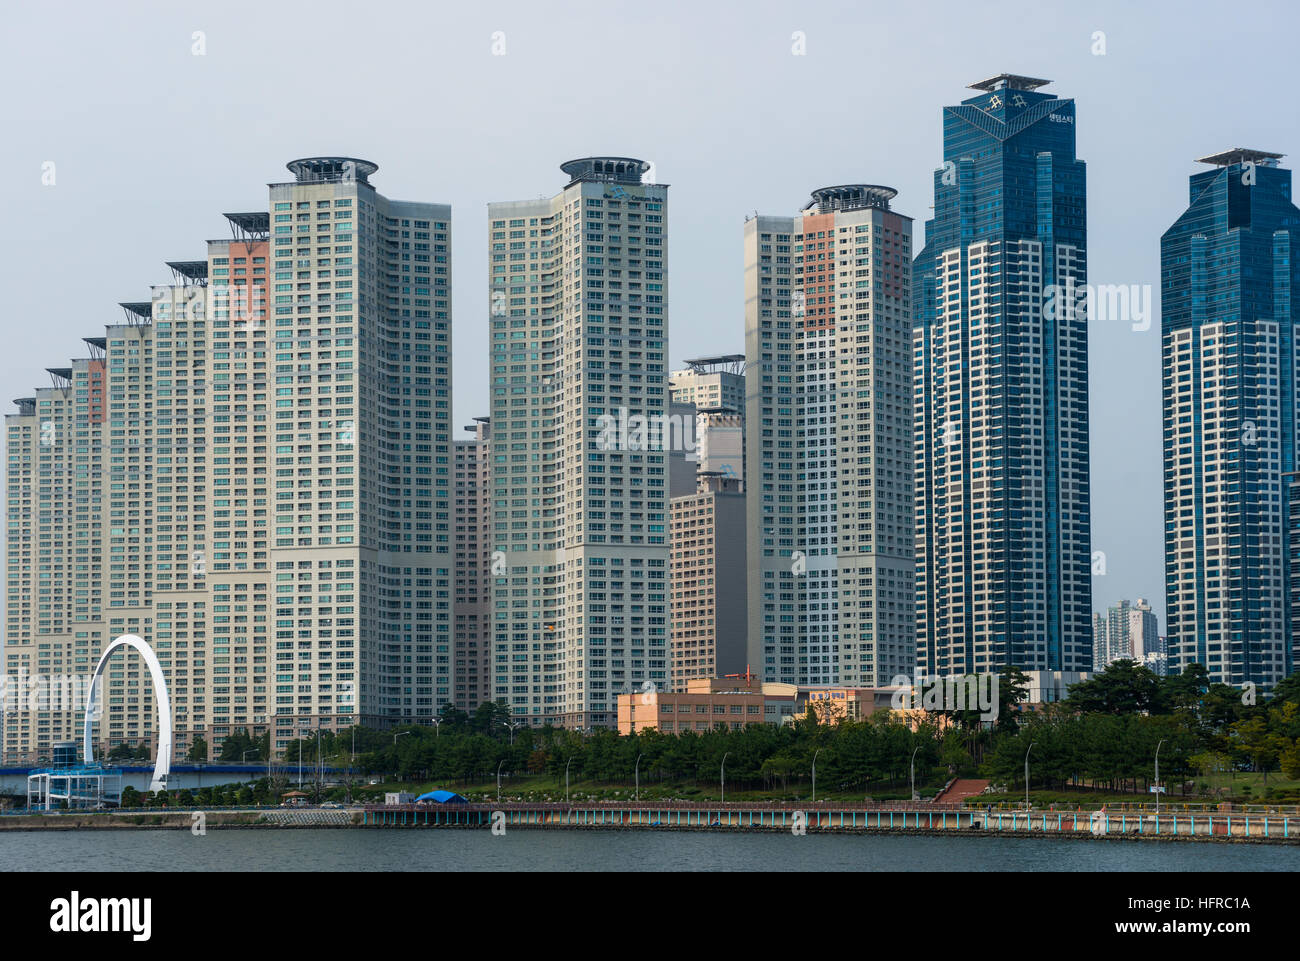 Residential high rise apartment blocks across the Suyoung river in Centum city. Pusan, South Korea. Stock Photo